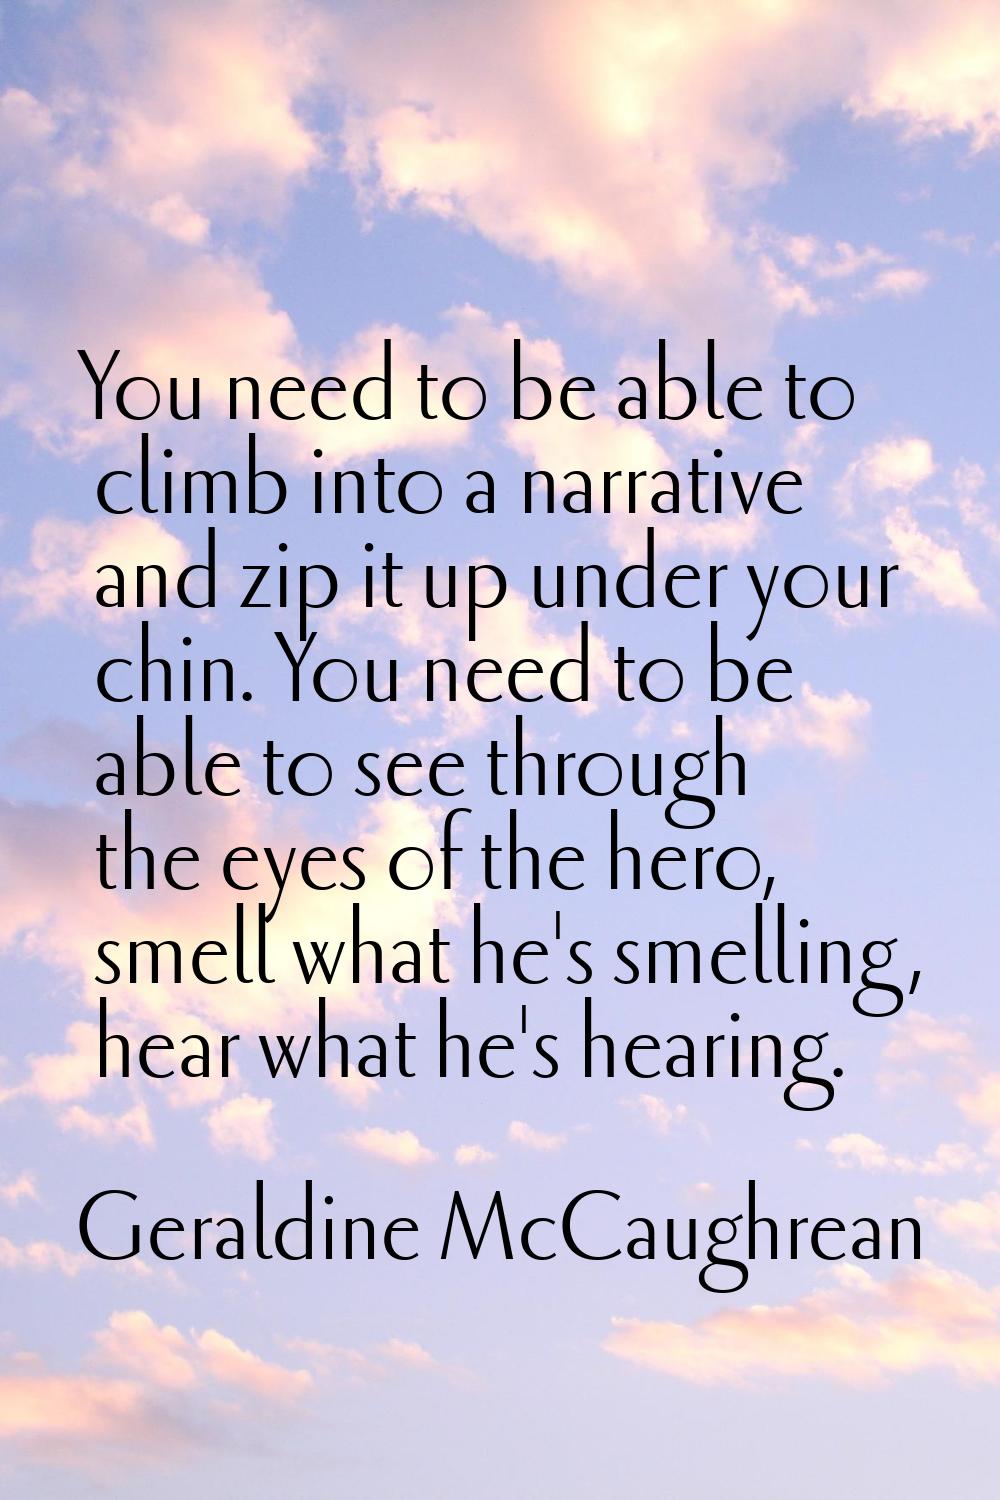 You need to be able to climb into a narrative and zip it up under your chin. You need to be able to